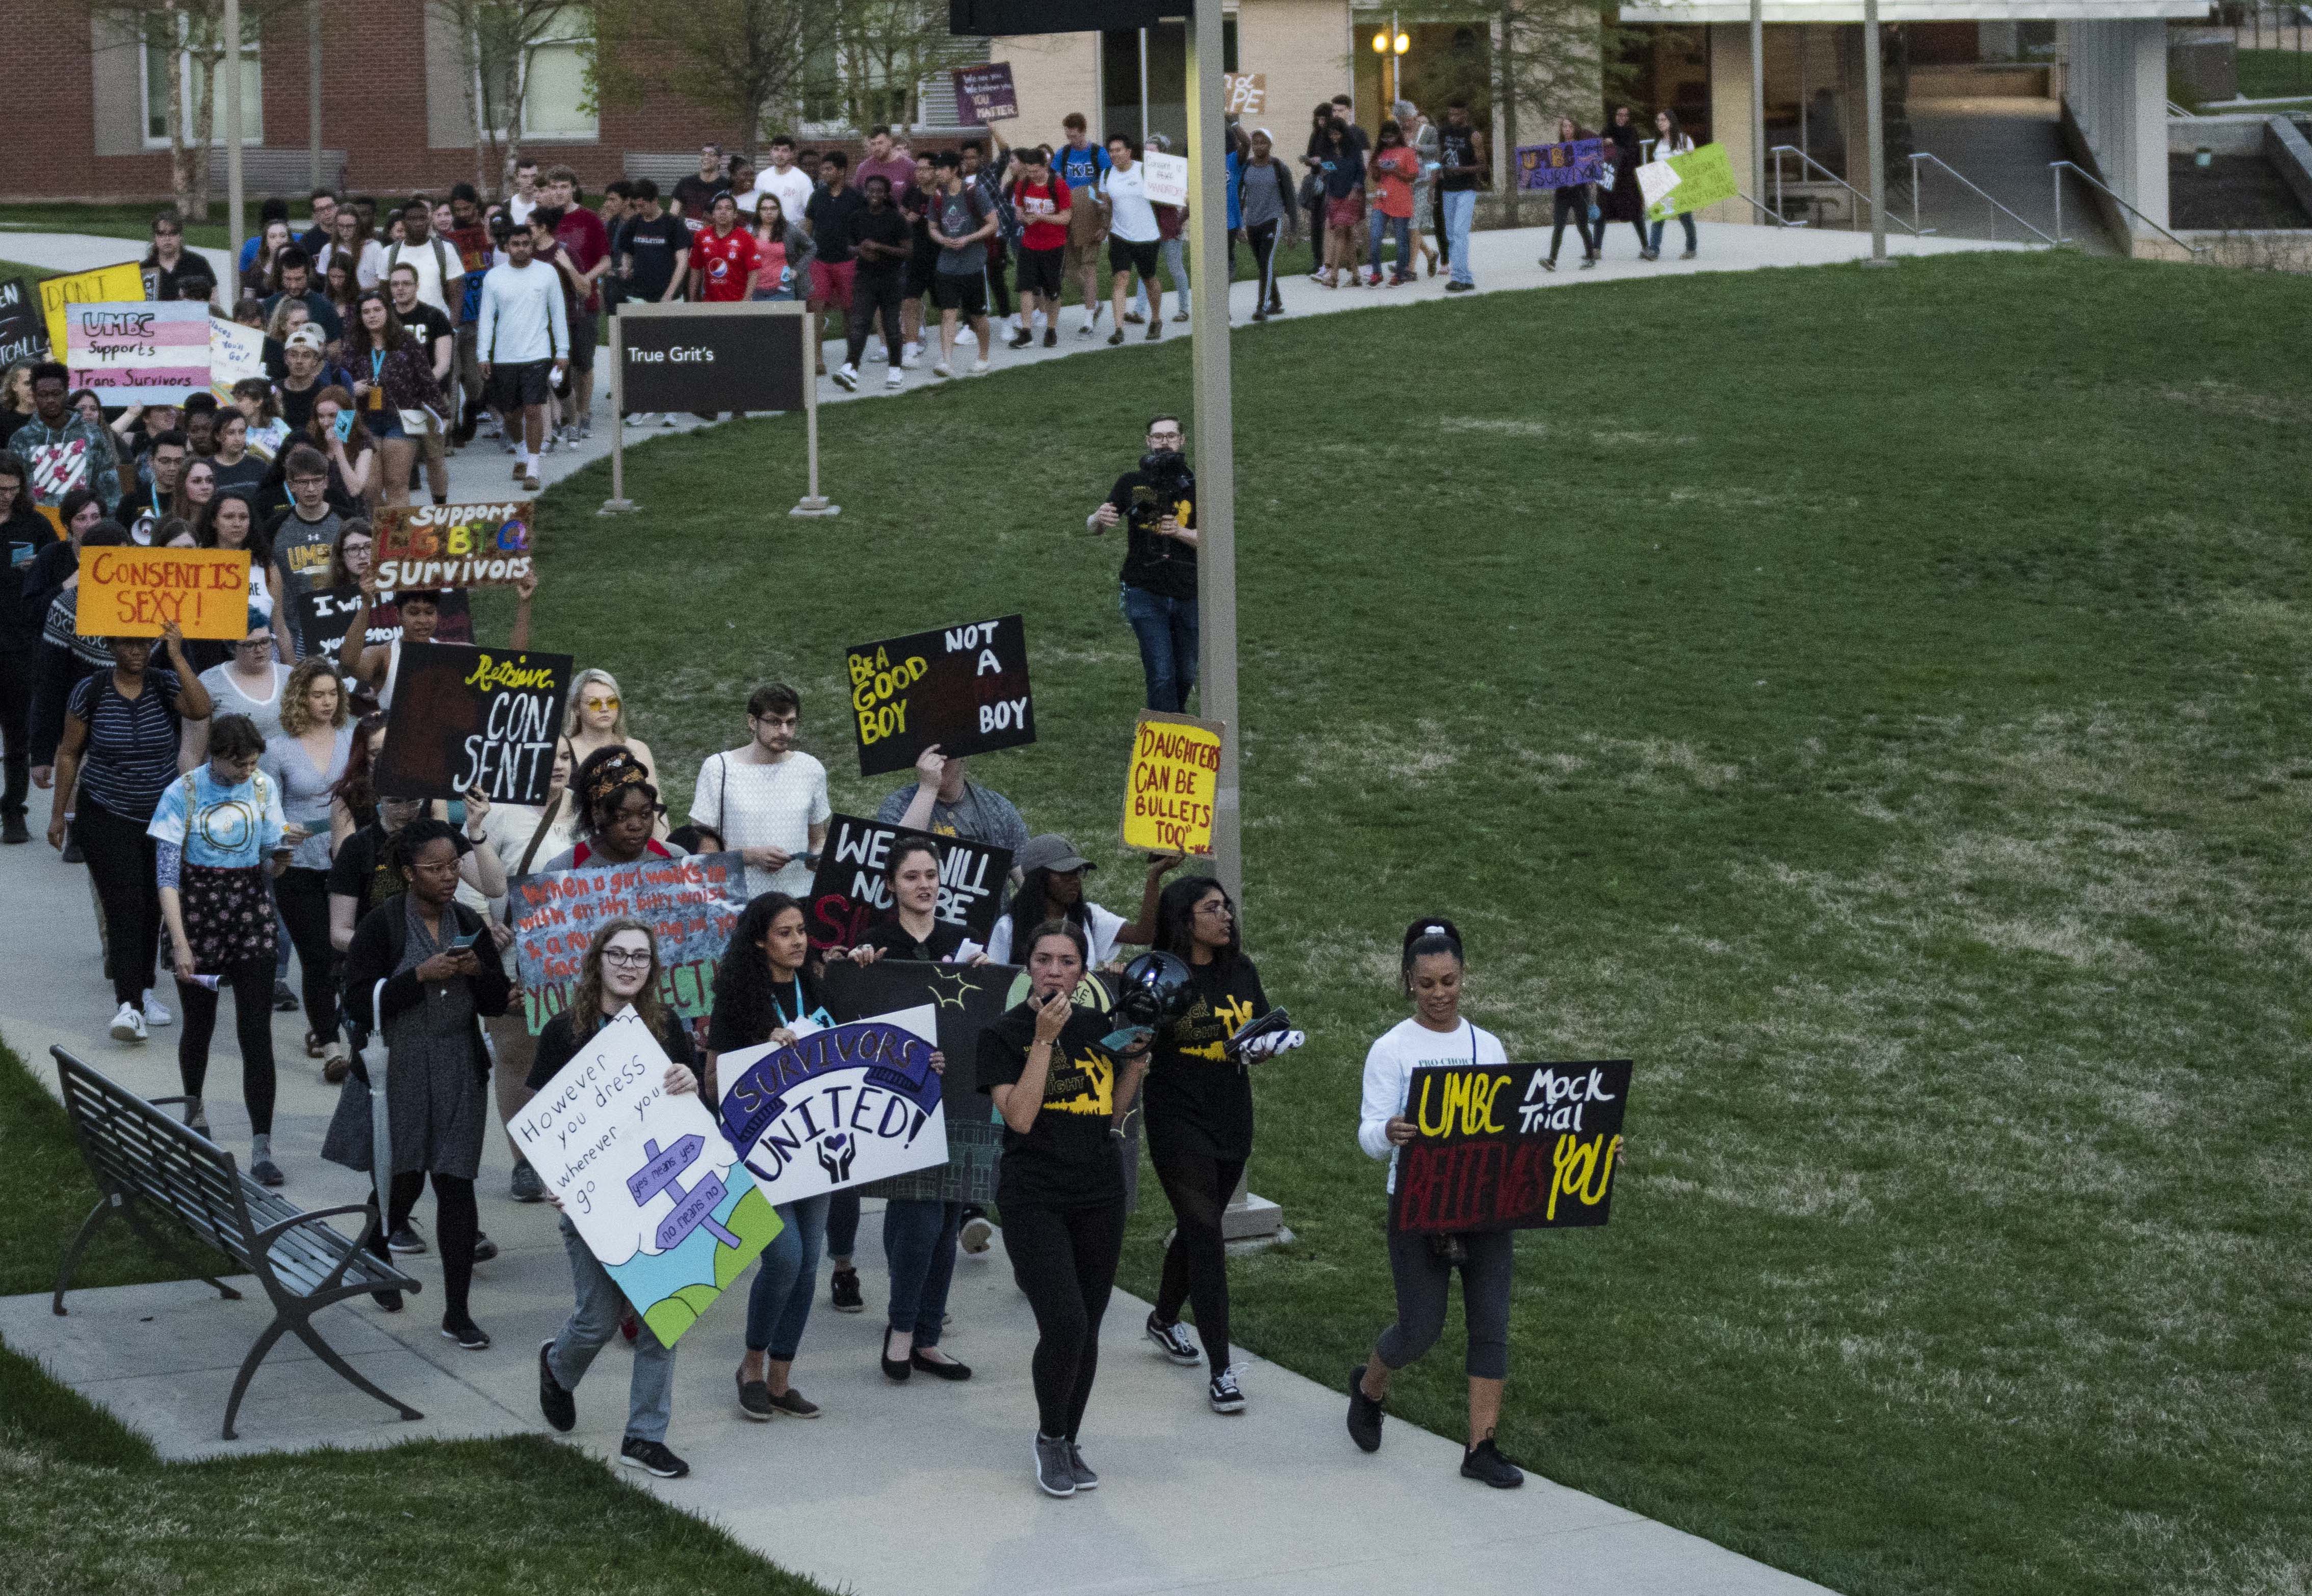 About 150 students march on the curved sidewalk in front of True Grit’s holding protest signs with pro-consent messages. 